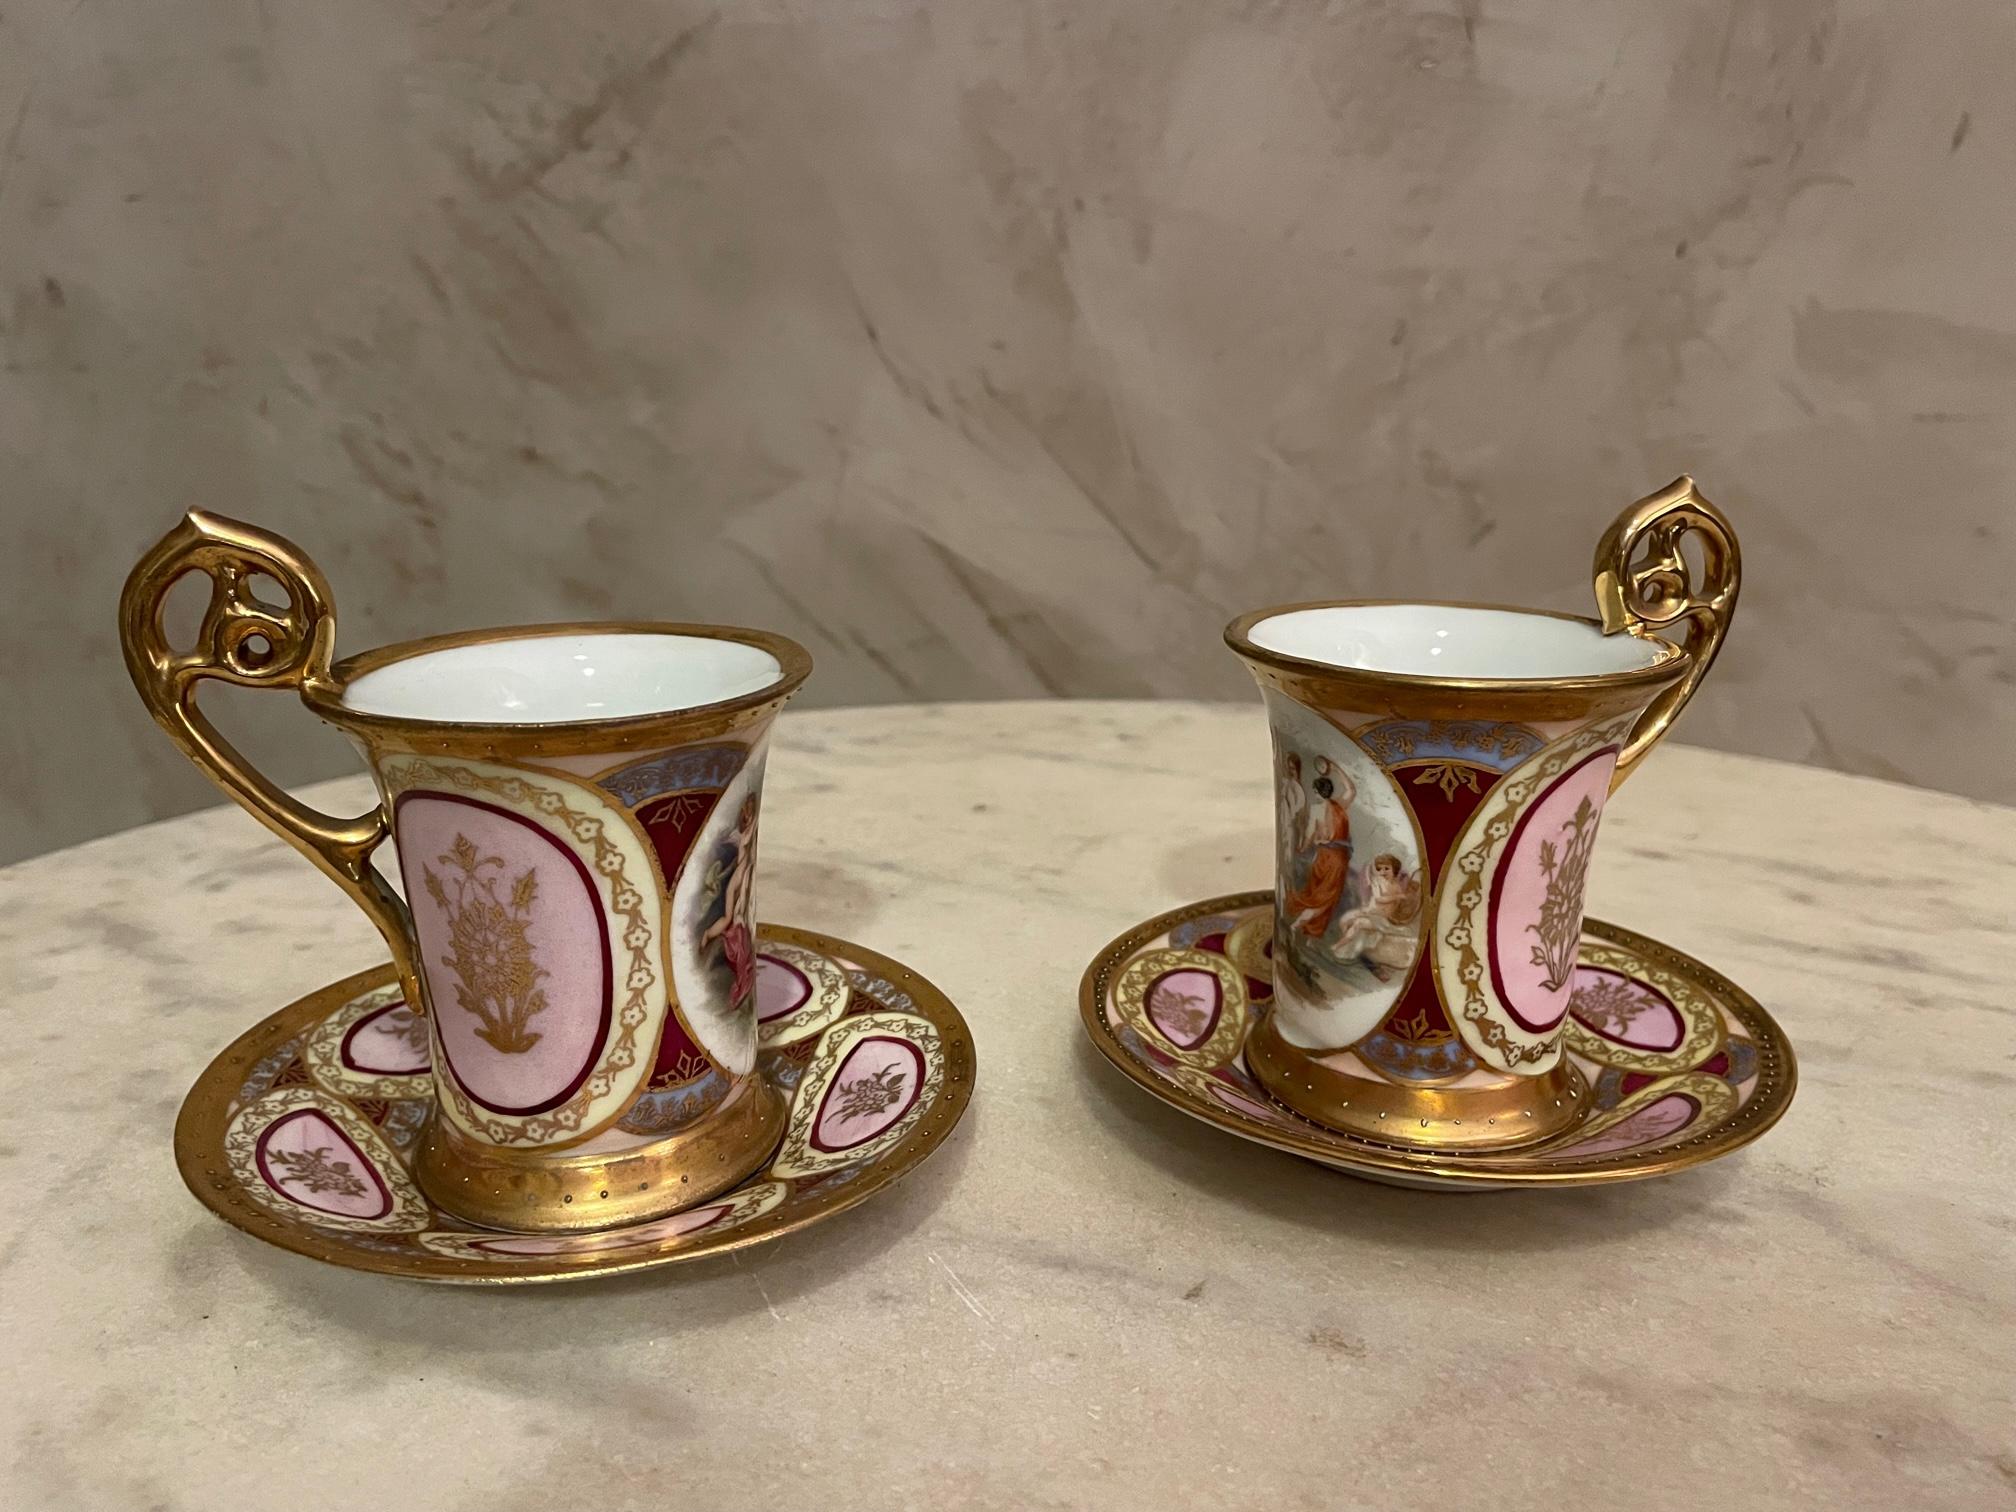 Beautiful set of two tea cups and saucers made by the Vienna porcelain manufacture. Pretty romantic decoration on each cup (both are different). 
Gilded with gold leaf details. Stamp of the Vienna porcelain. 
Very good condition.